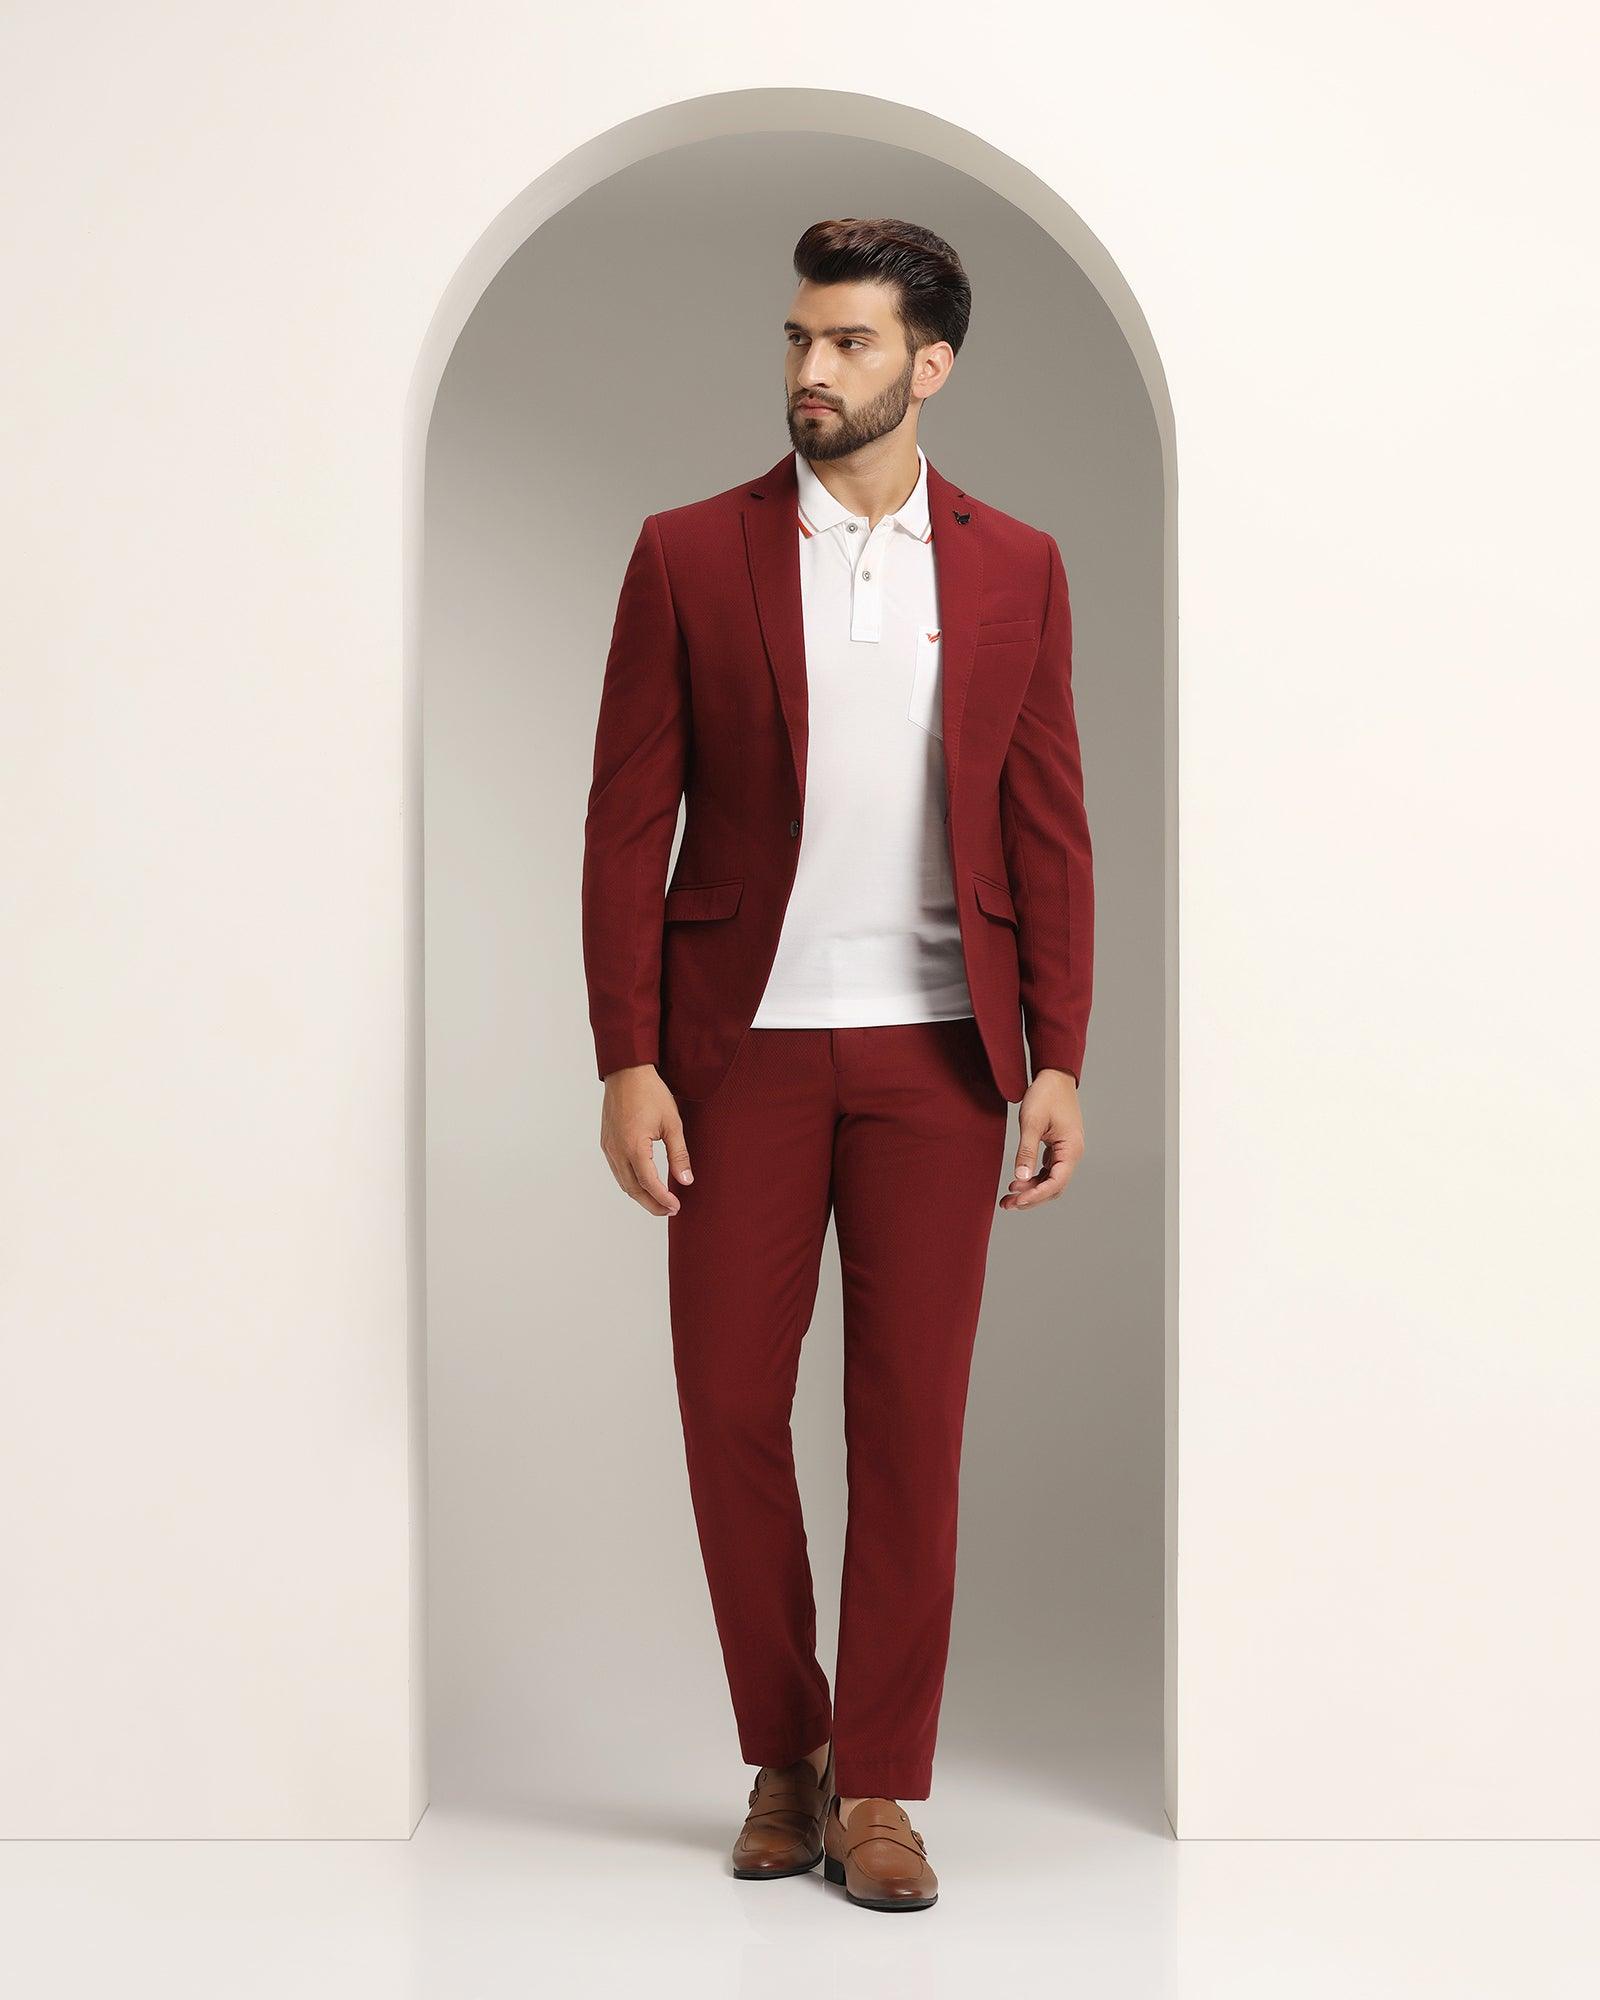 Textured 3 Pcs Suit In Maroon Xomnia CPNM1722R2PA23FL image9